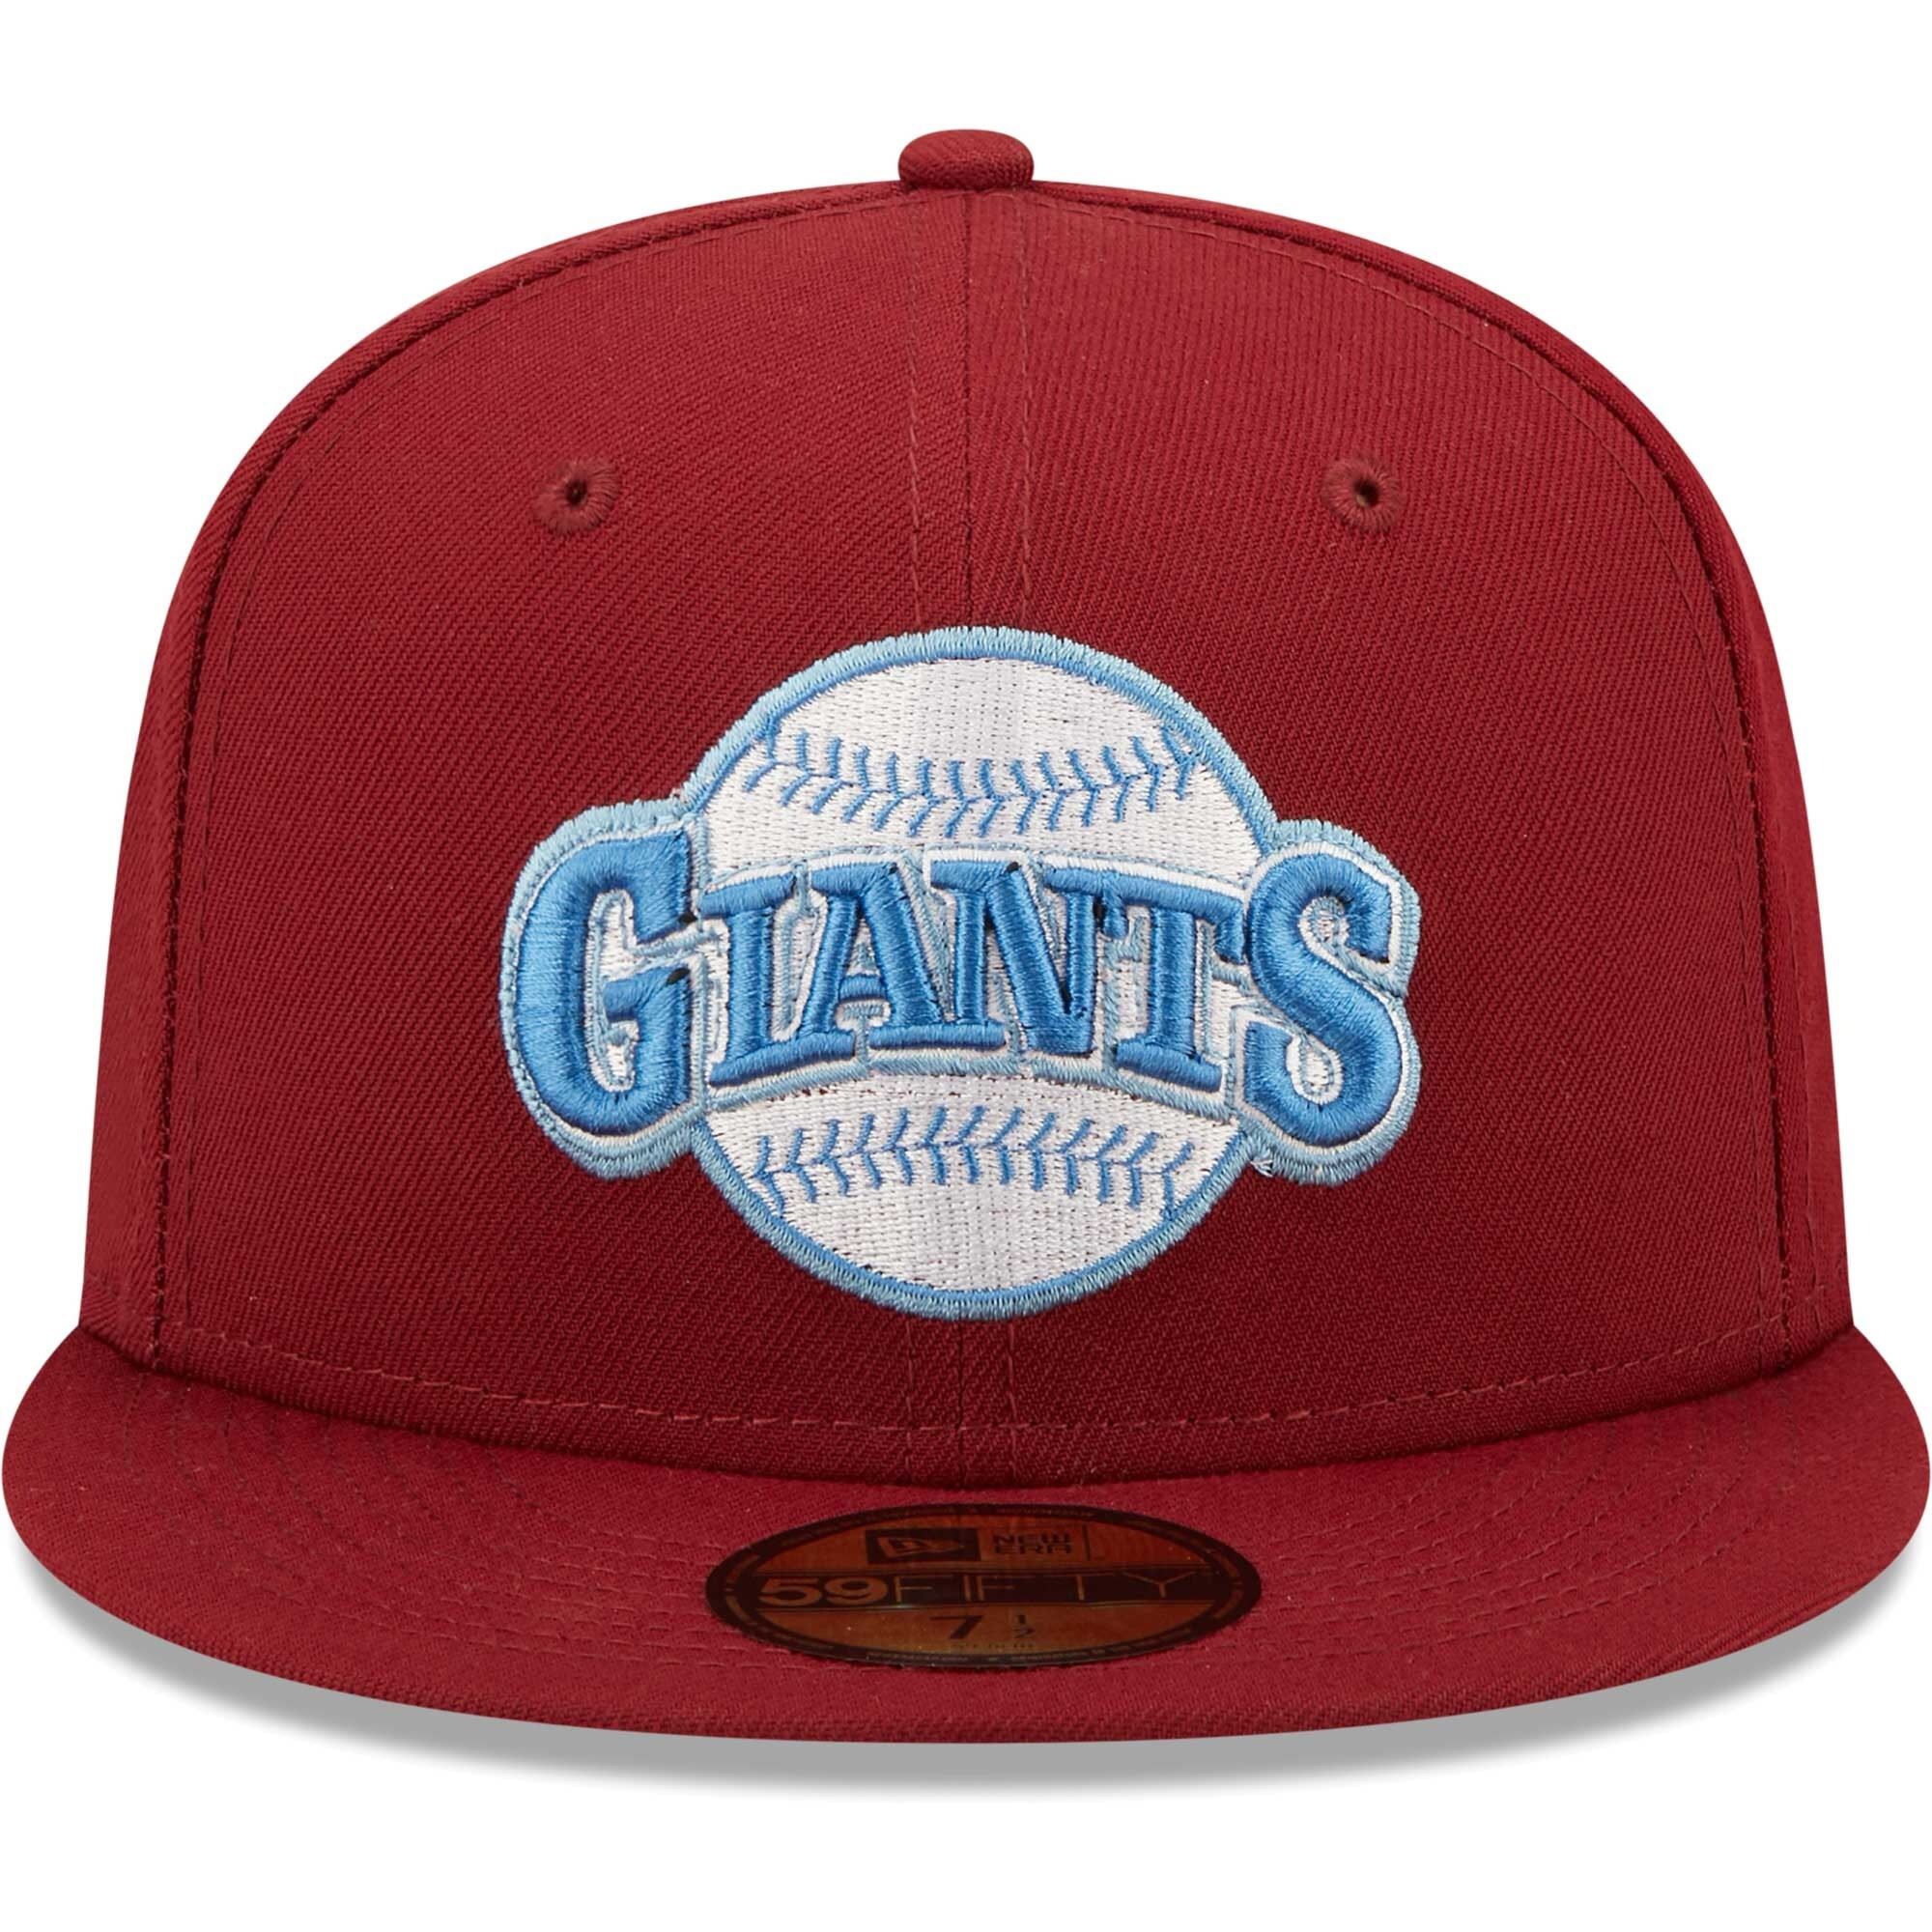 San Francisco Giants MLB Cooperstown 50th Anniversary Sidepatch Maroon Blue 59Fifty Basecap New Era